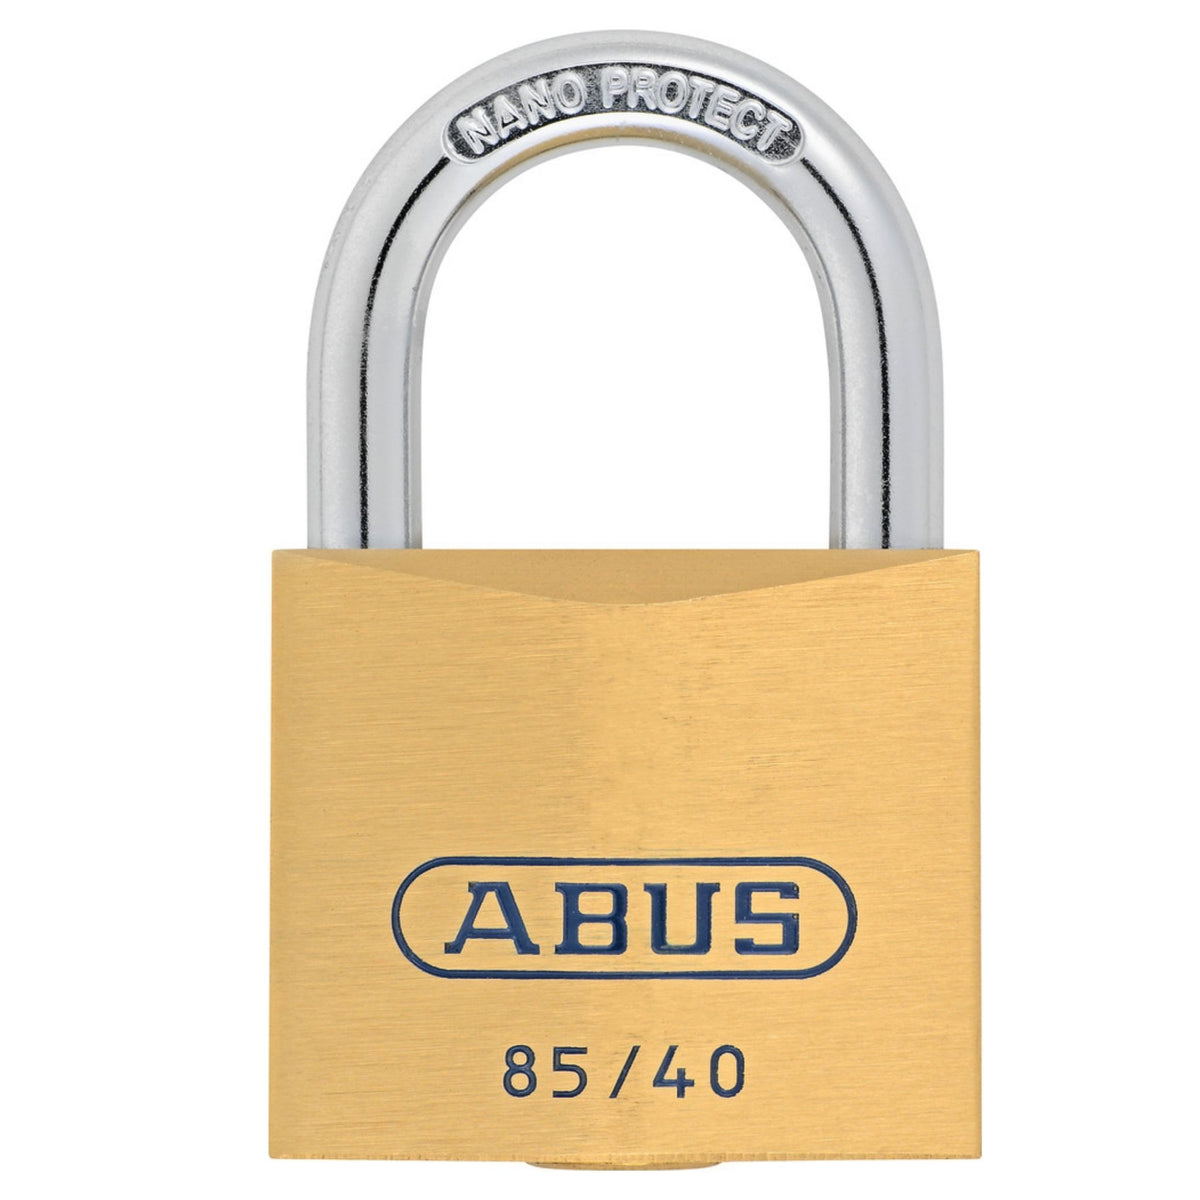 Abus 85/40 KD Brass Lock High Security Keyed Different Padlock - The Lock Source